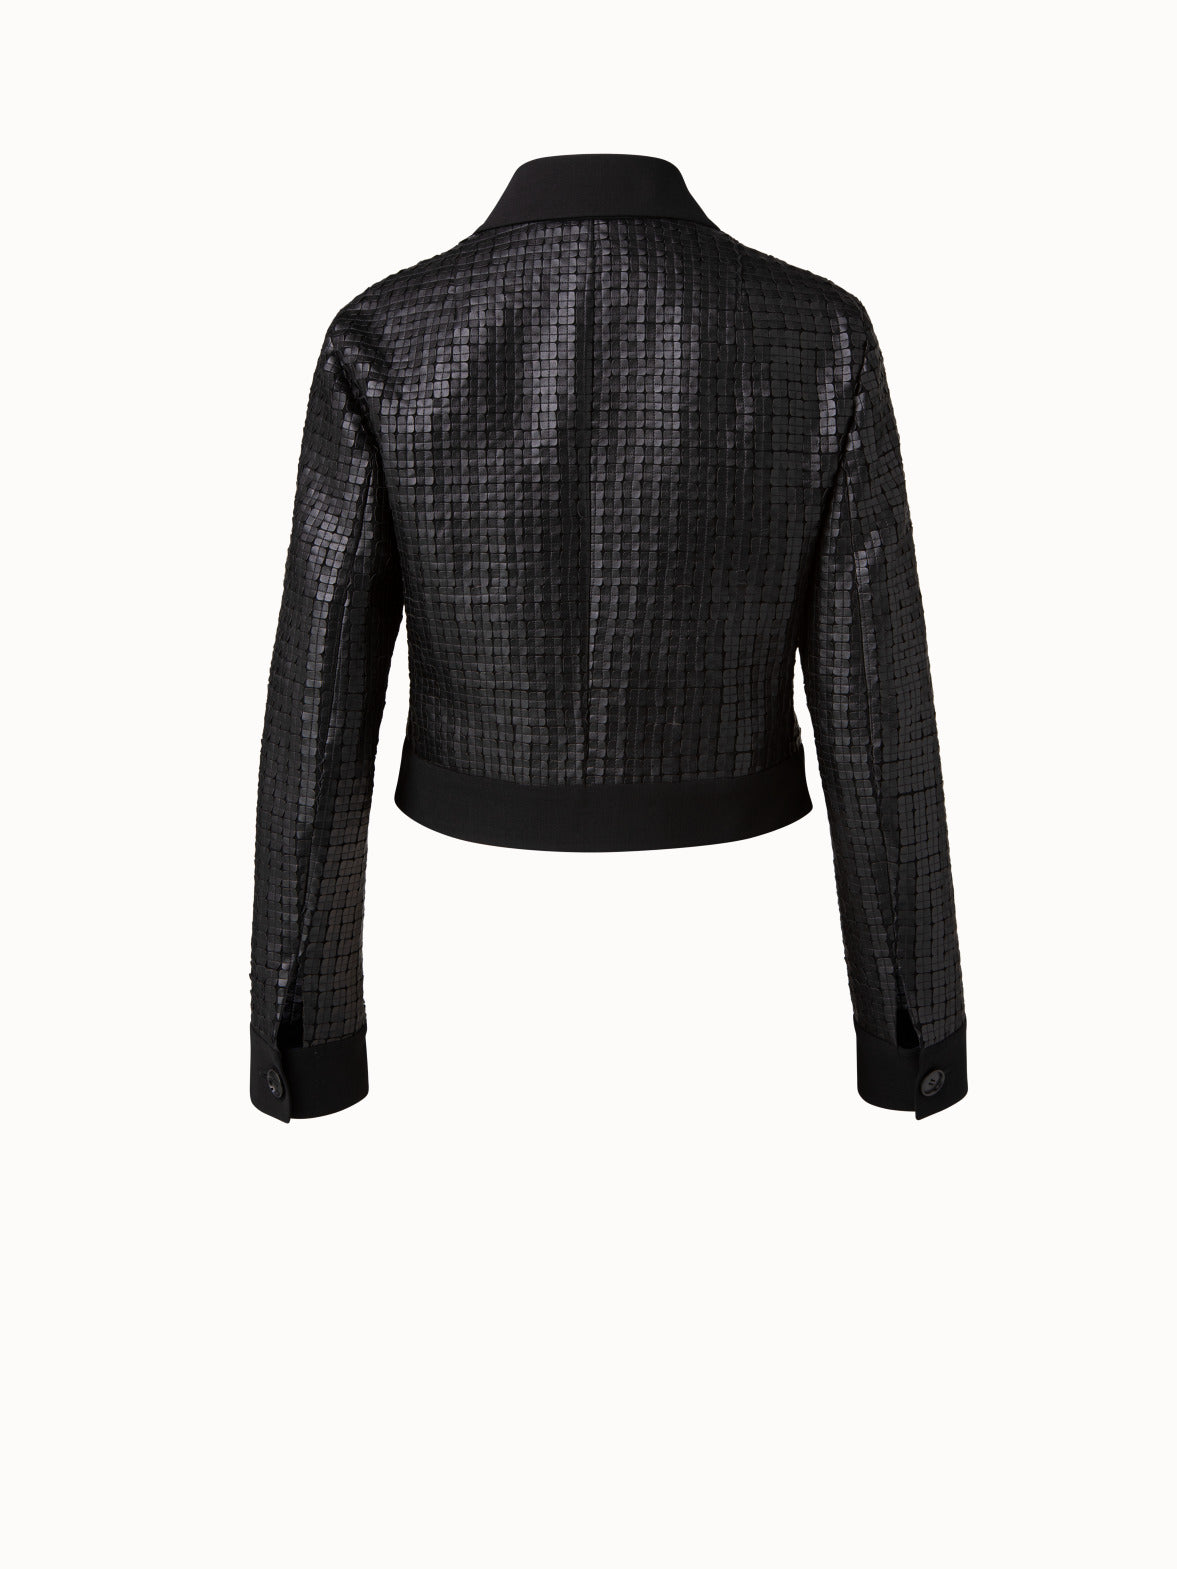 Wool Double-Face Short Jacket with with Faux Leather Superposé Grid Em